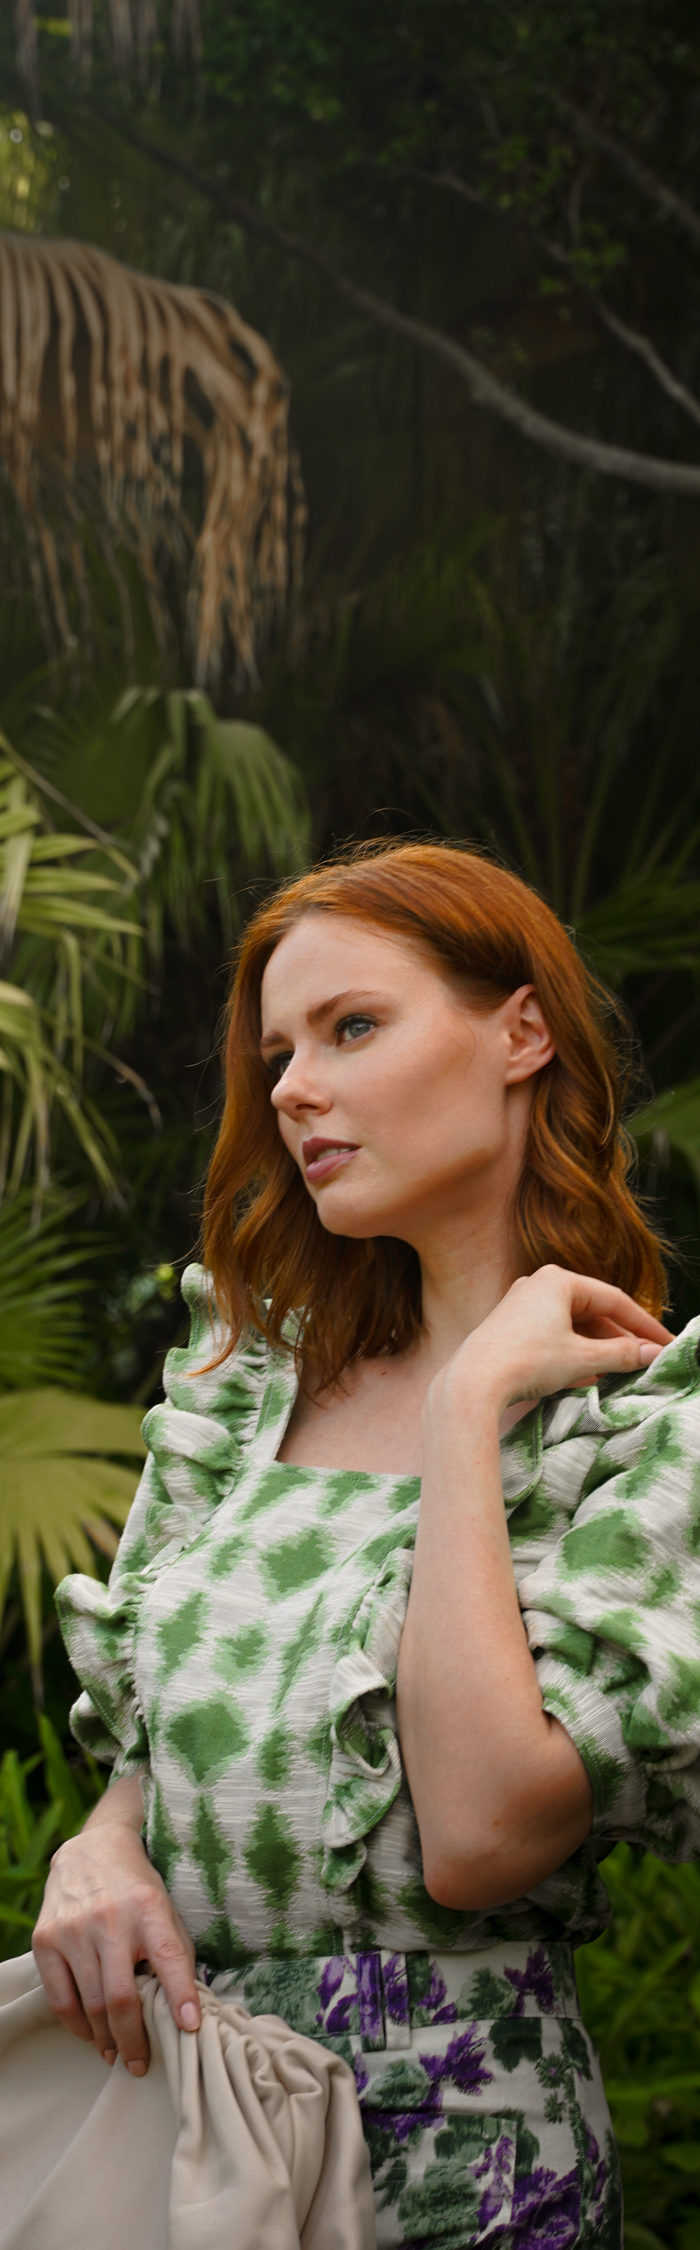 Miss USA 2011 Alyssa Campanella of The A List blog shares her favorite Sézane pieces on the last days of summer